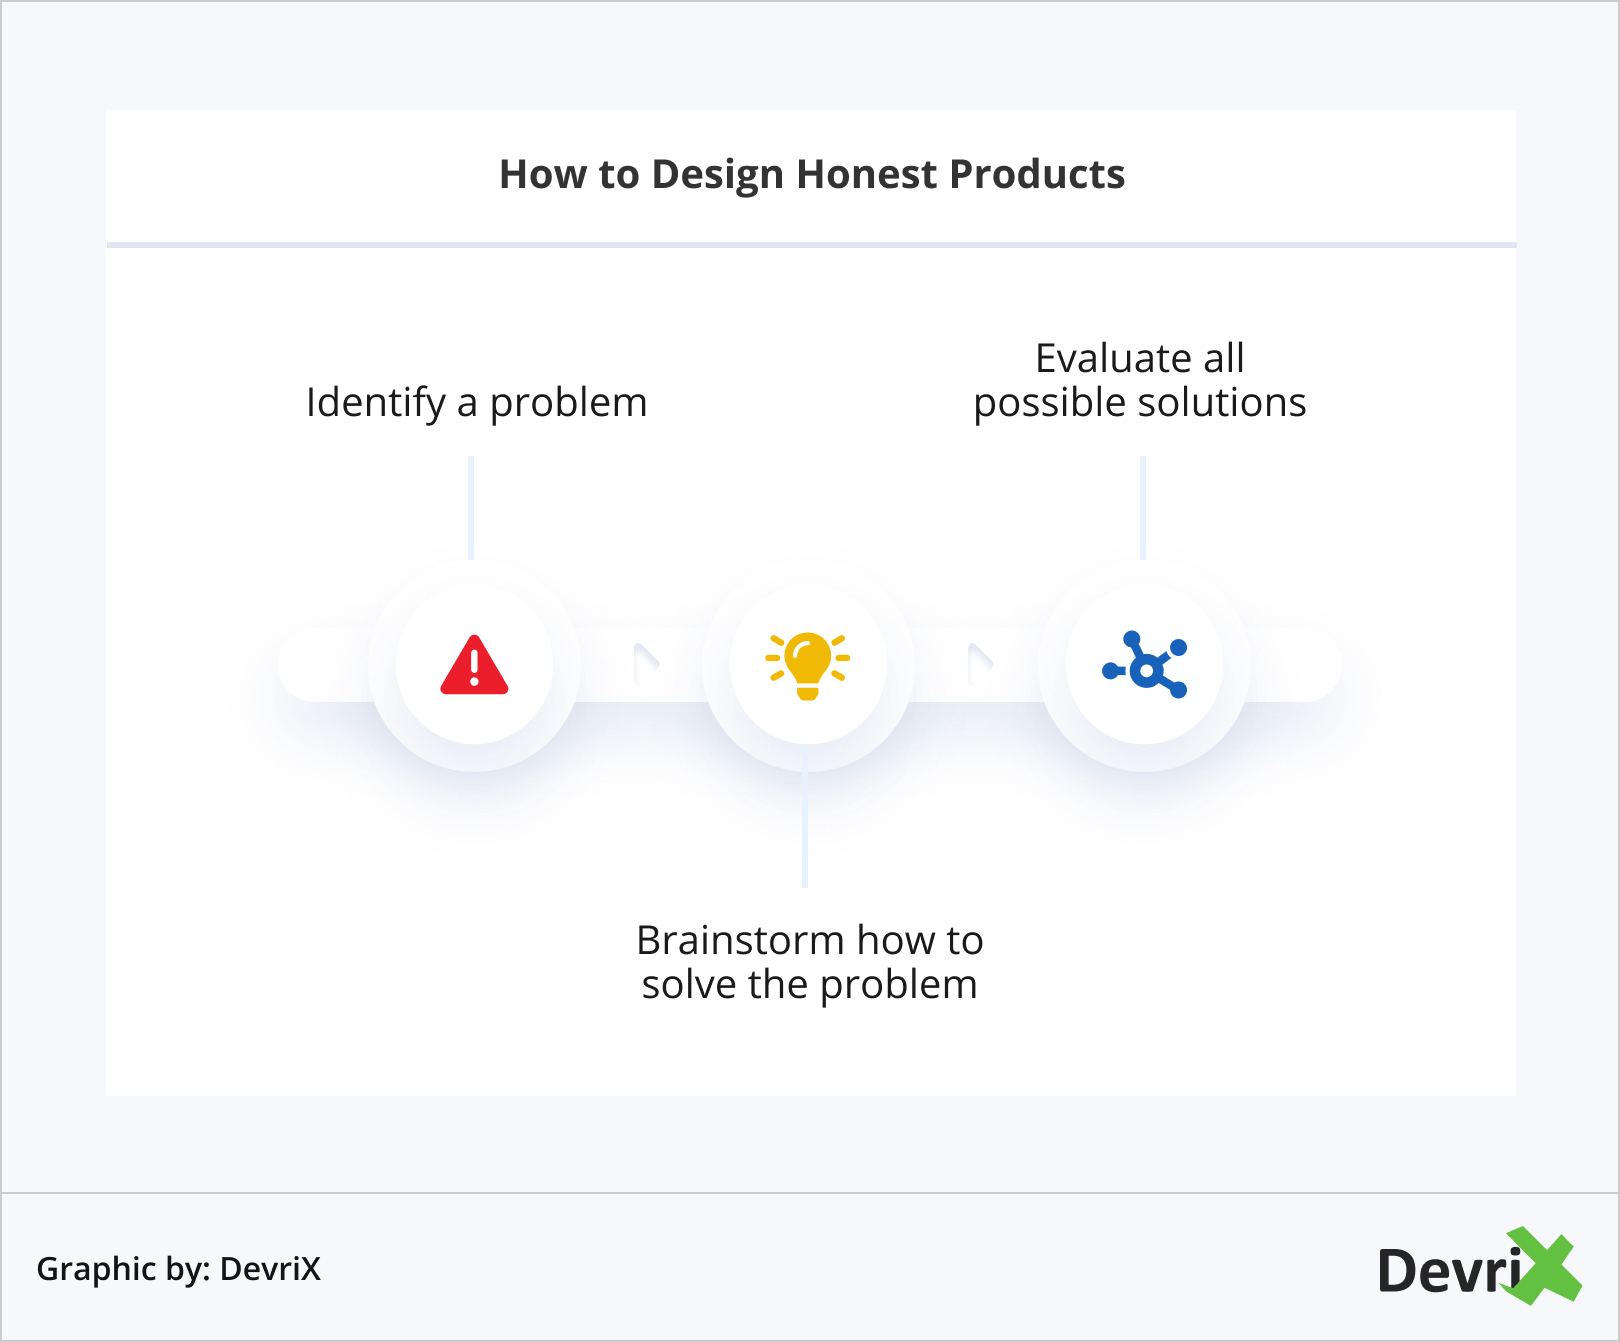 How to Design Honest Products